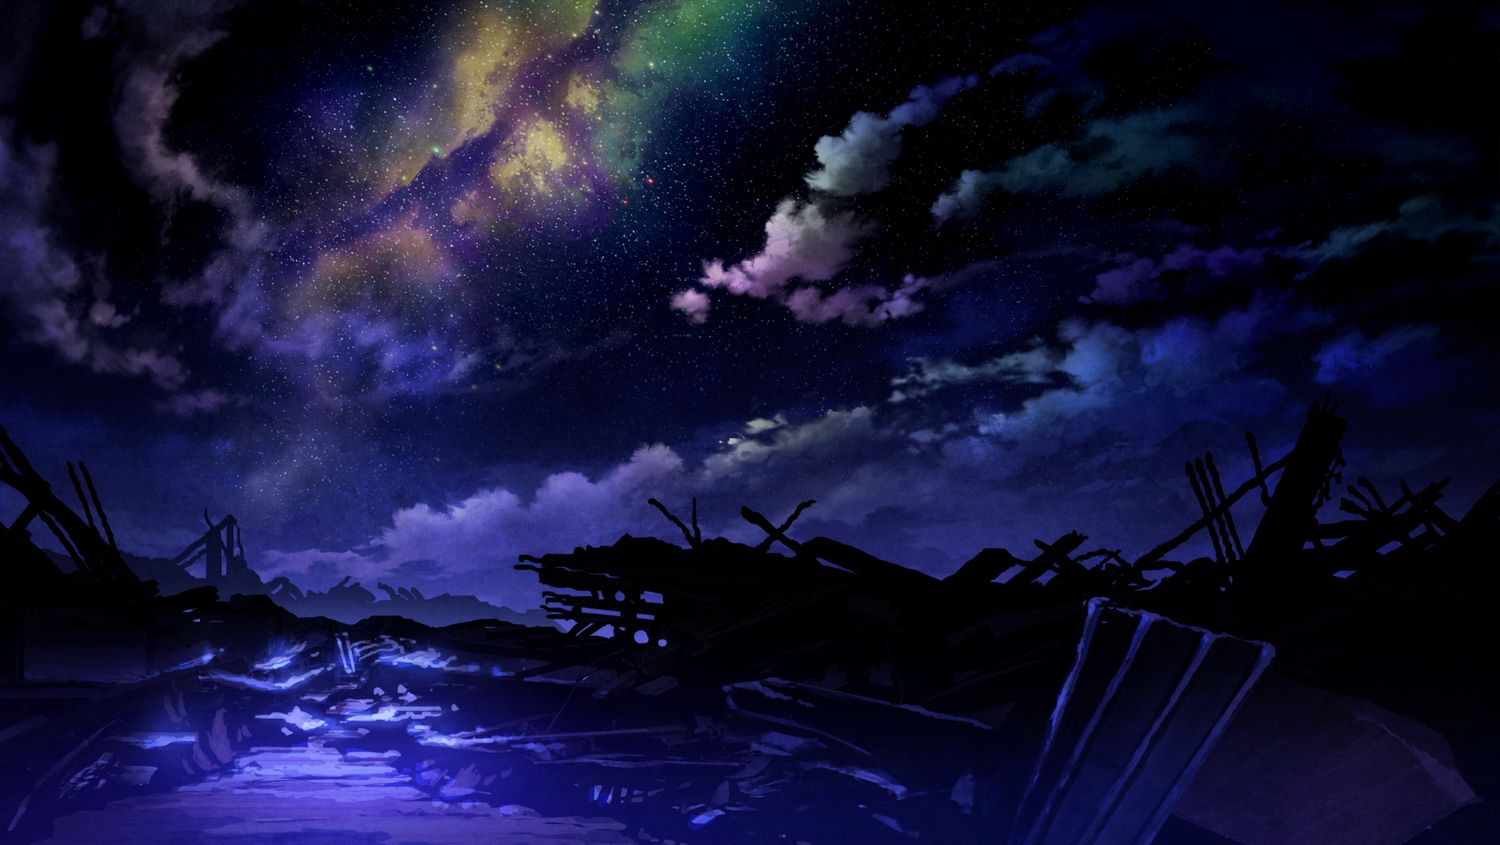 Night Sky With Cloud Anime Wallpapers Wallpaper Cave